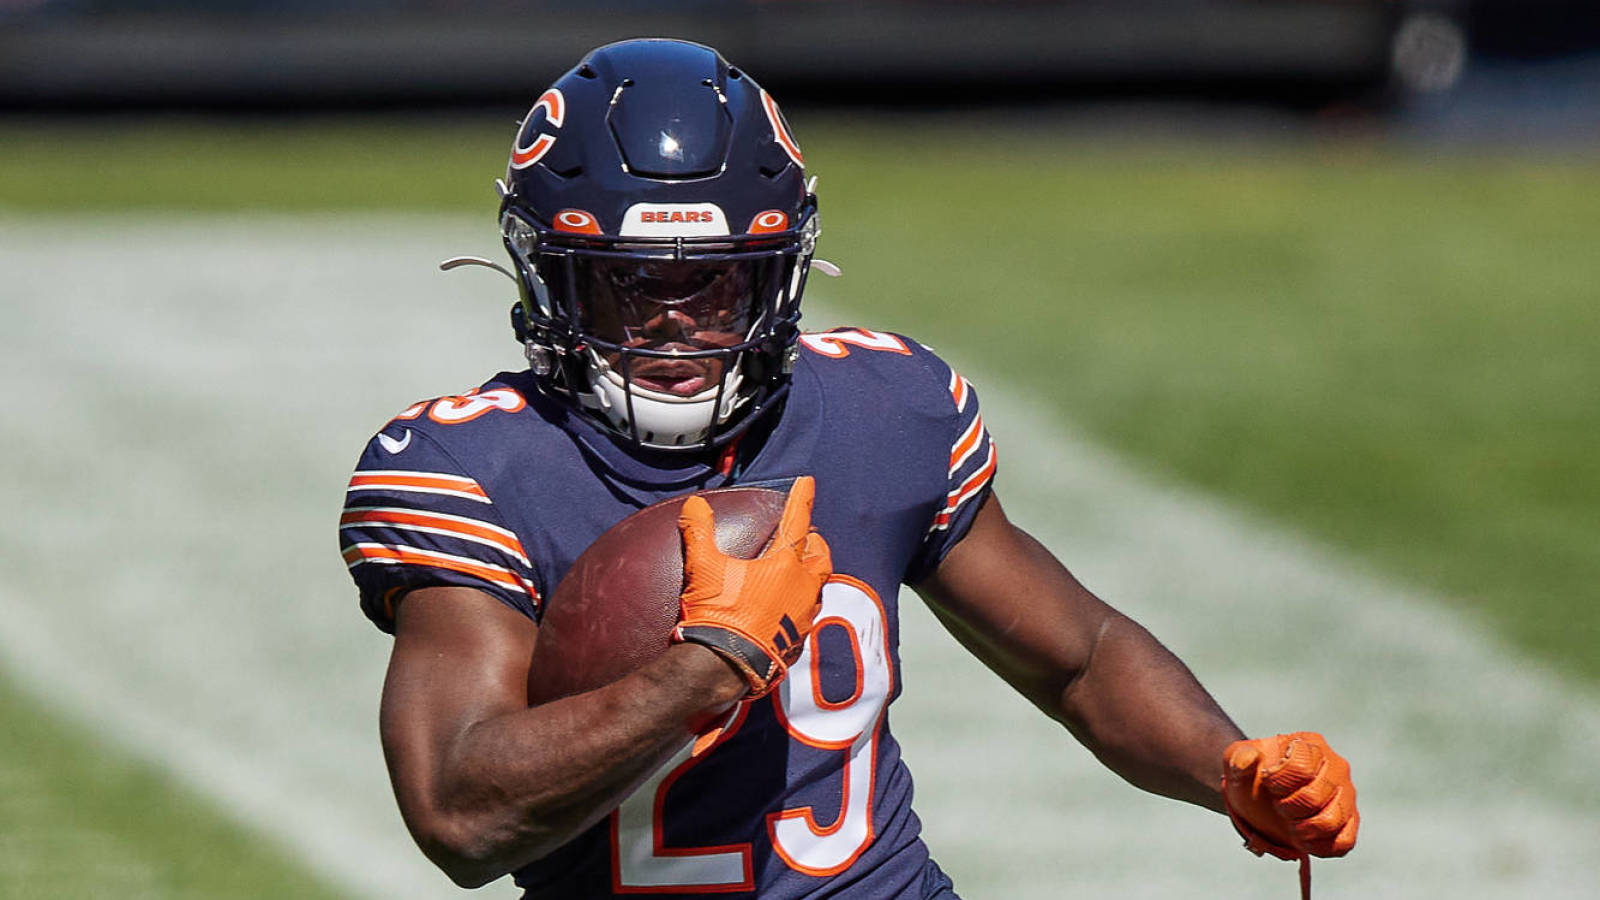 Twin brother of Bears RB Tarik Cohen dies after being electrocuted